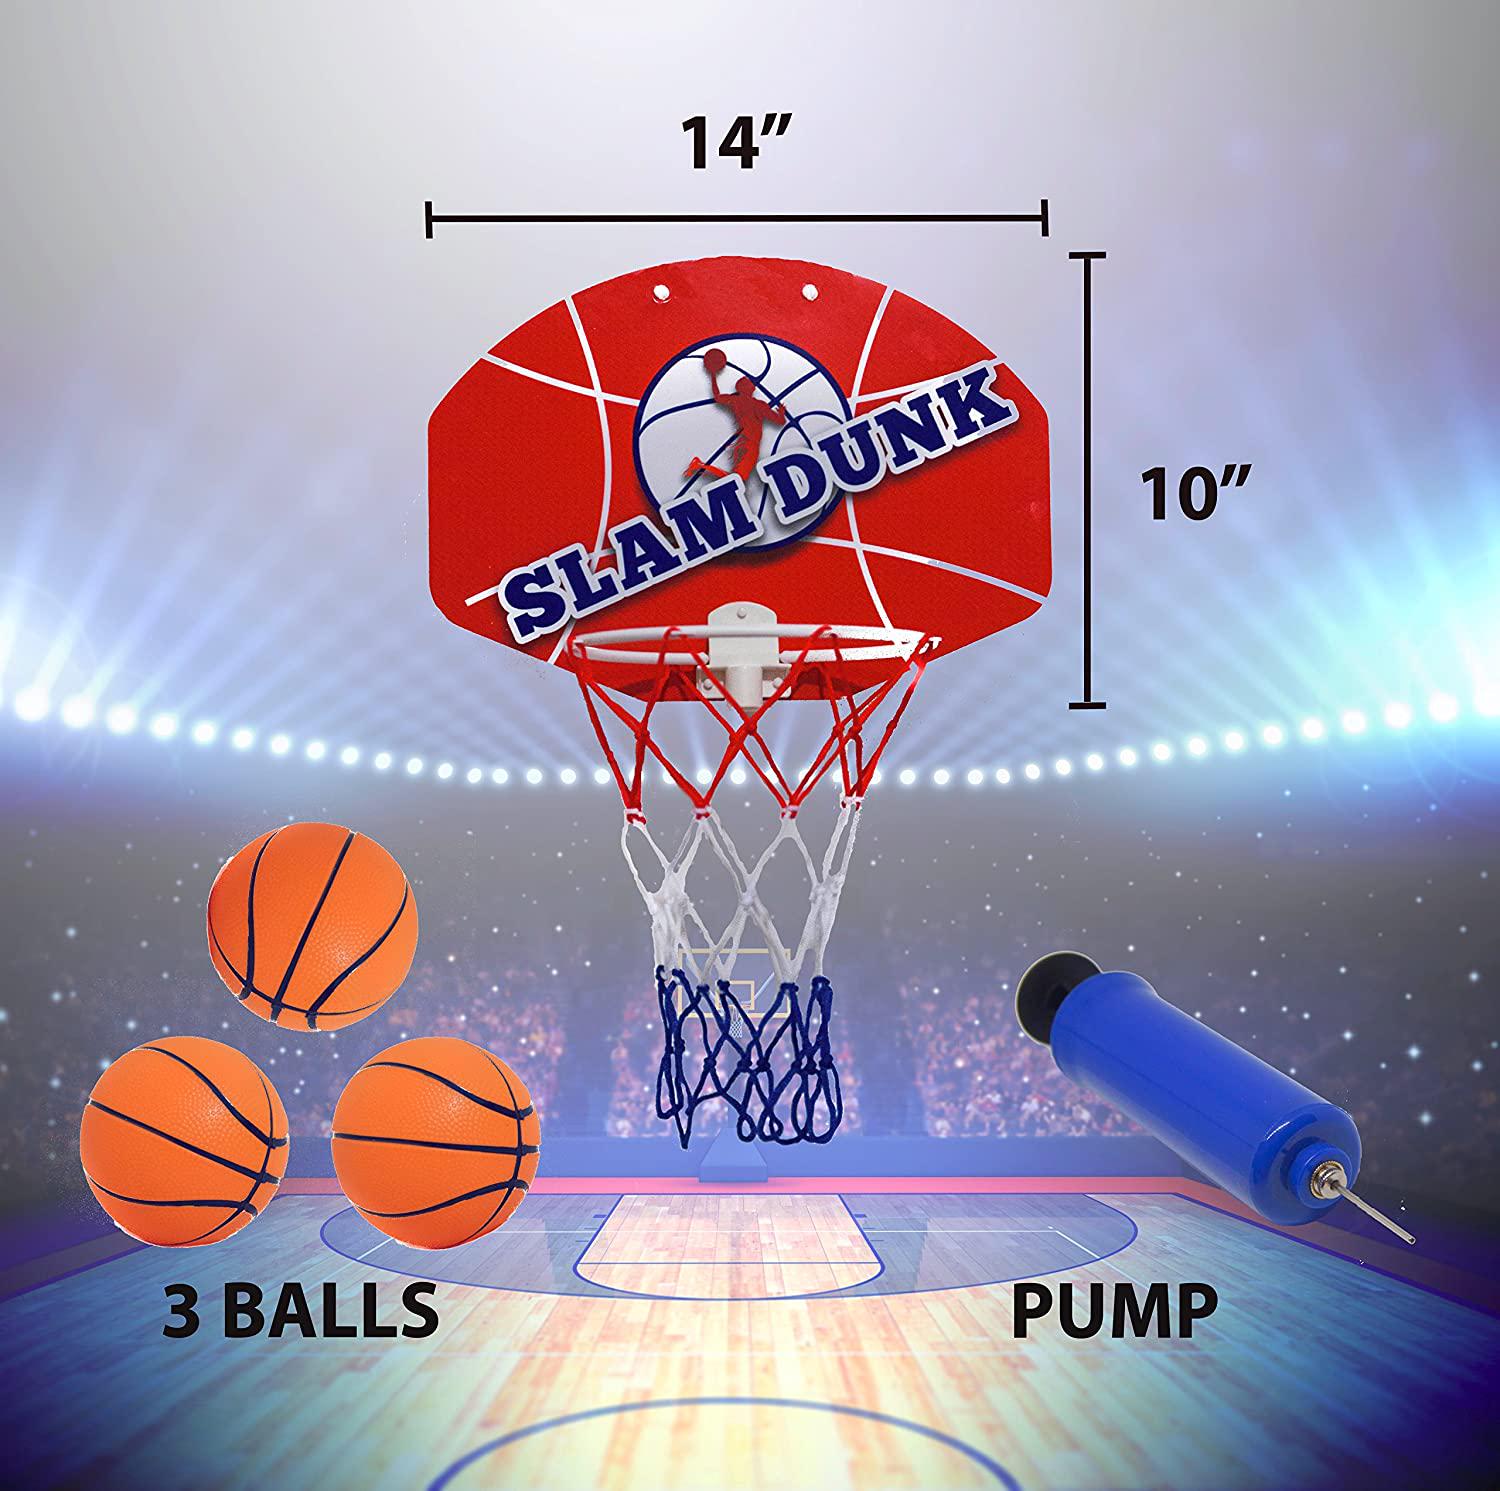 Kipi Toys, Kipi Toys Slam Dunk Mini Basketball Hoop Set-Over The Door Plastic Toy Backboard 14 X 10 with Net, 3 Ball Pump. Simple Assembly, Easy Clip-on Mount Game for Kids Children Or Adults